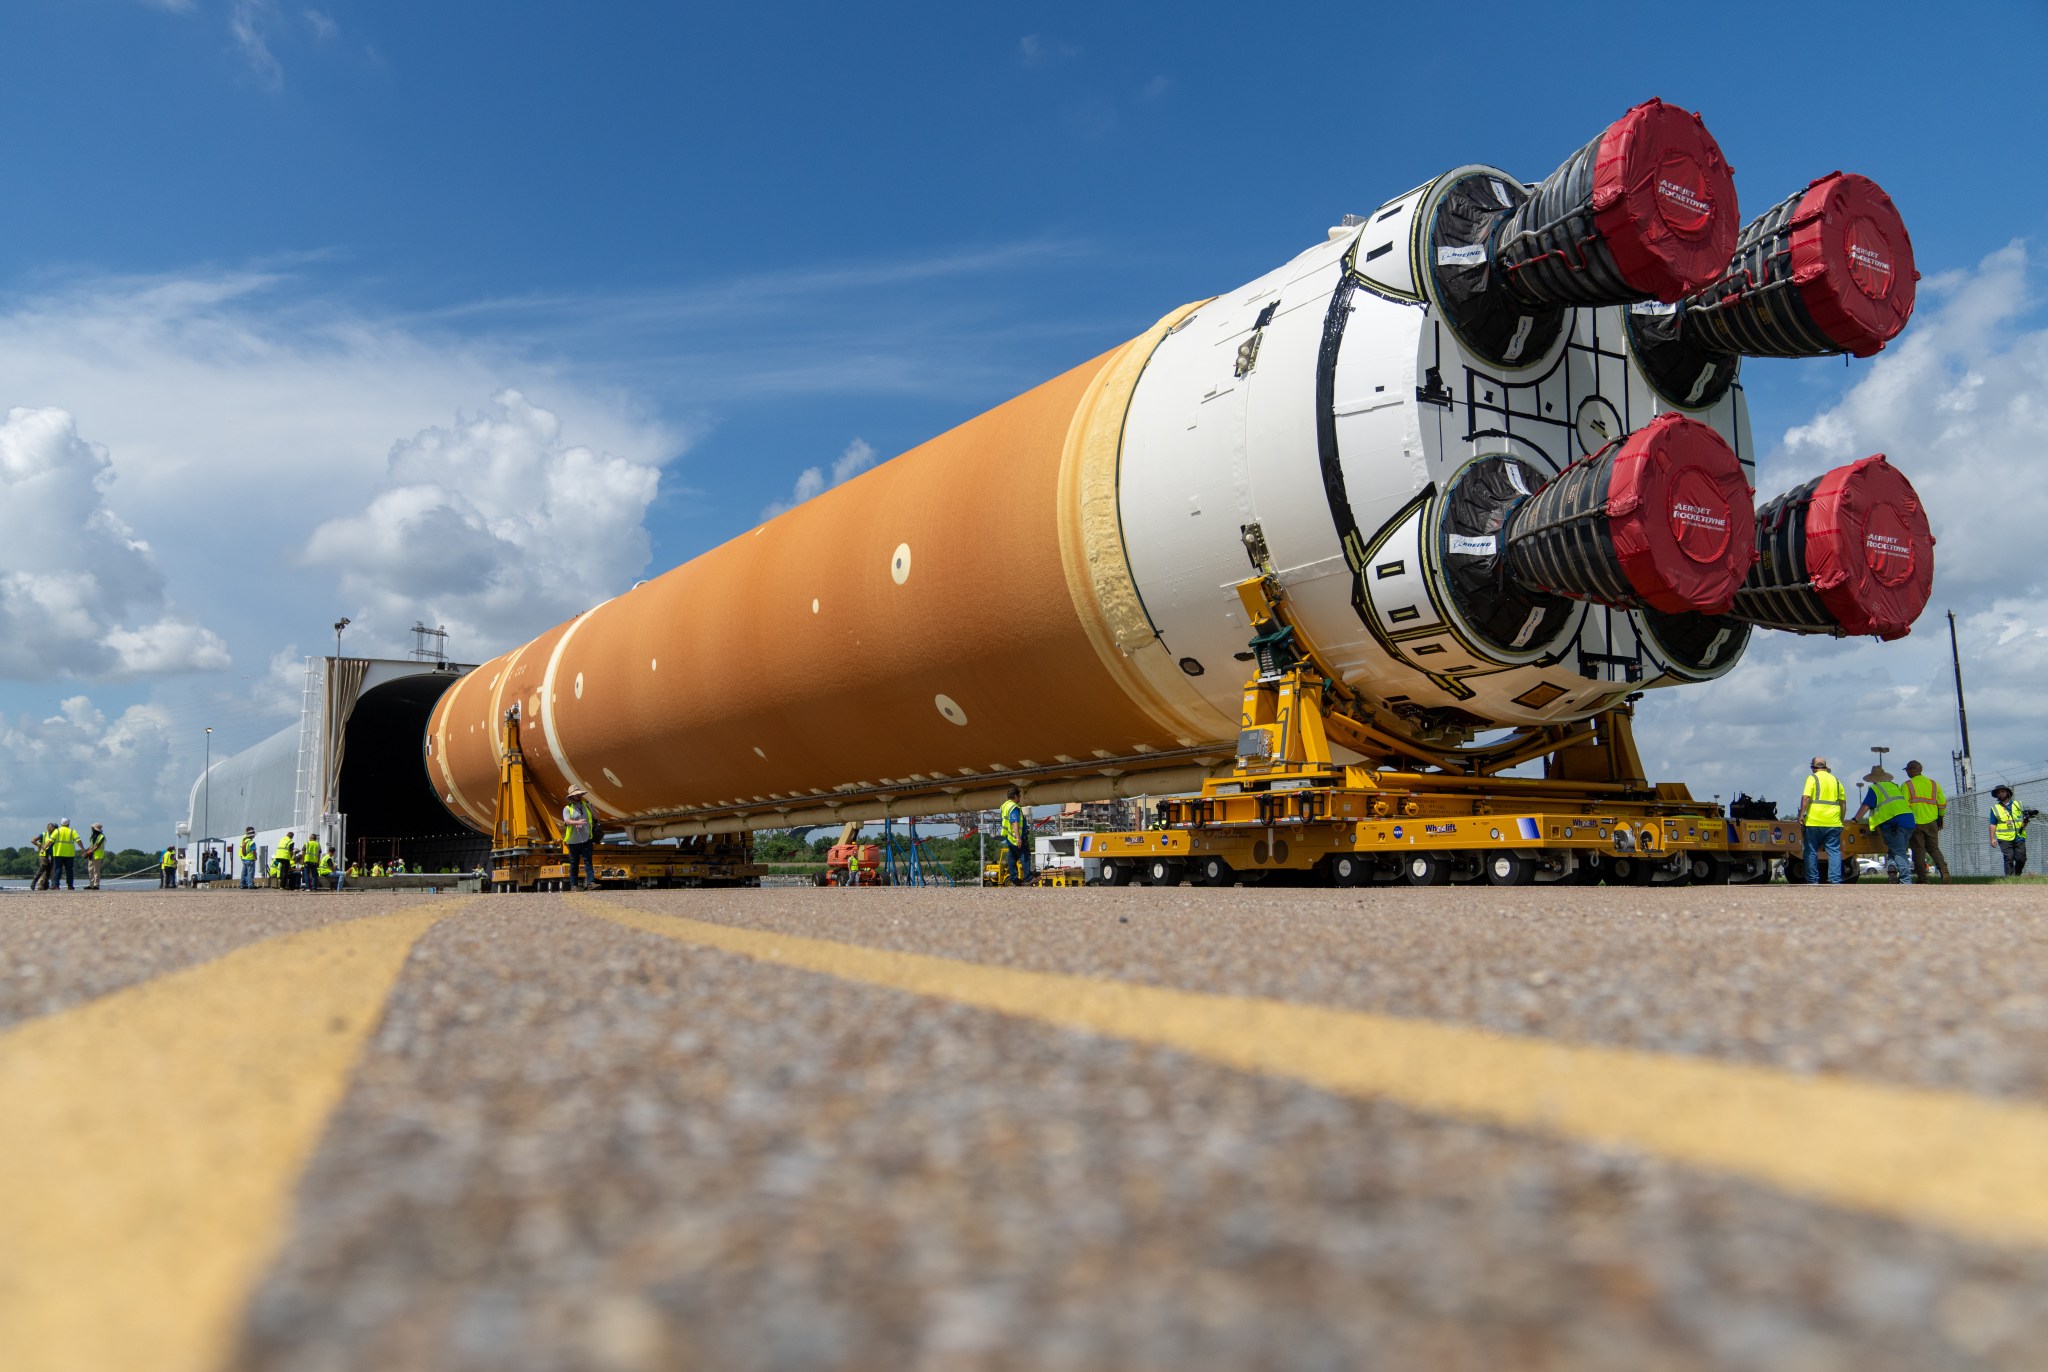 An image showing the core stage of the SLS rocket being moved out of NASA's Michoud Assembly Facility in New Orleans and towards the agency's Pegasus Barge which will transport it to NASA's Kennedy Space Center in Florida.